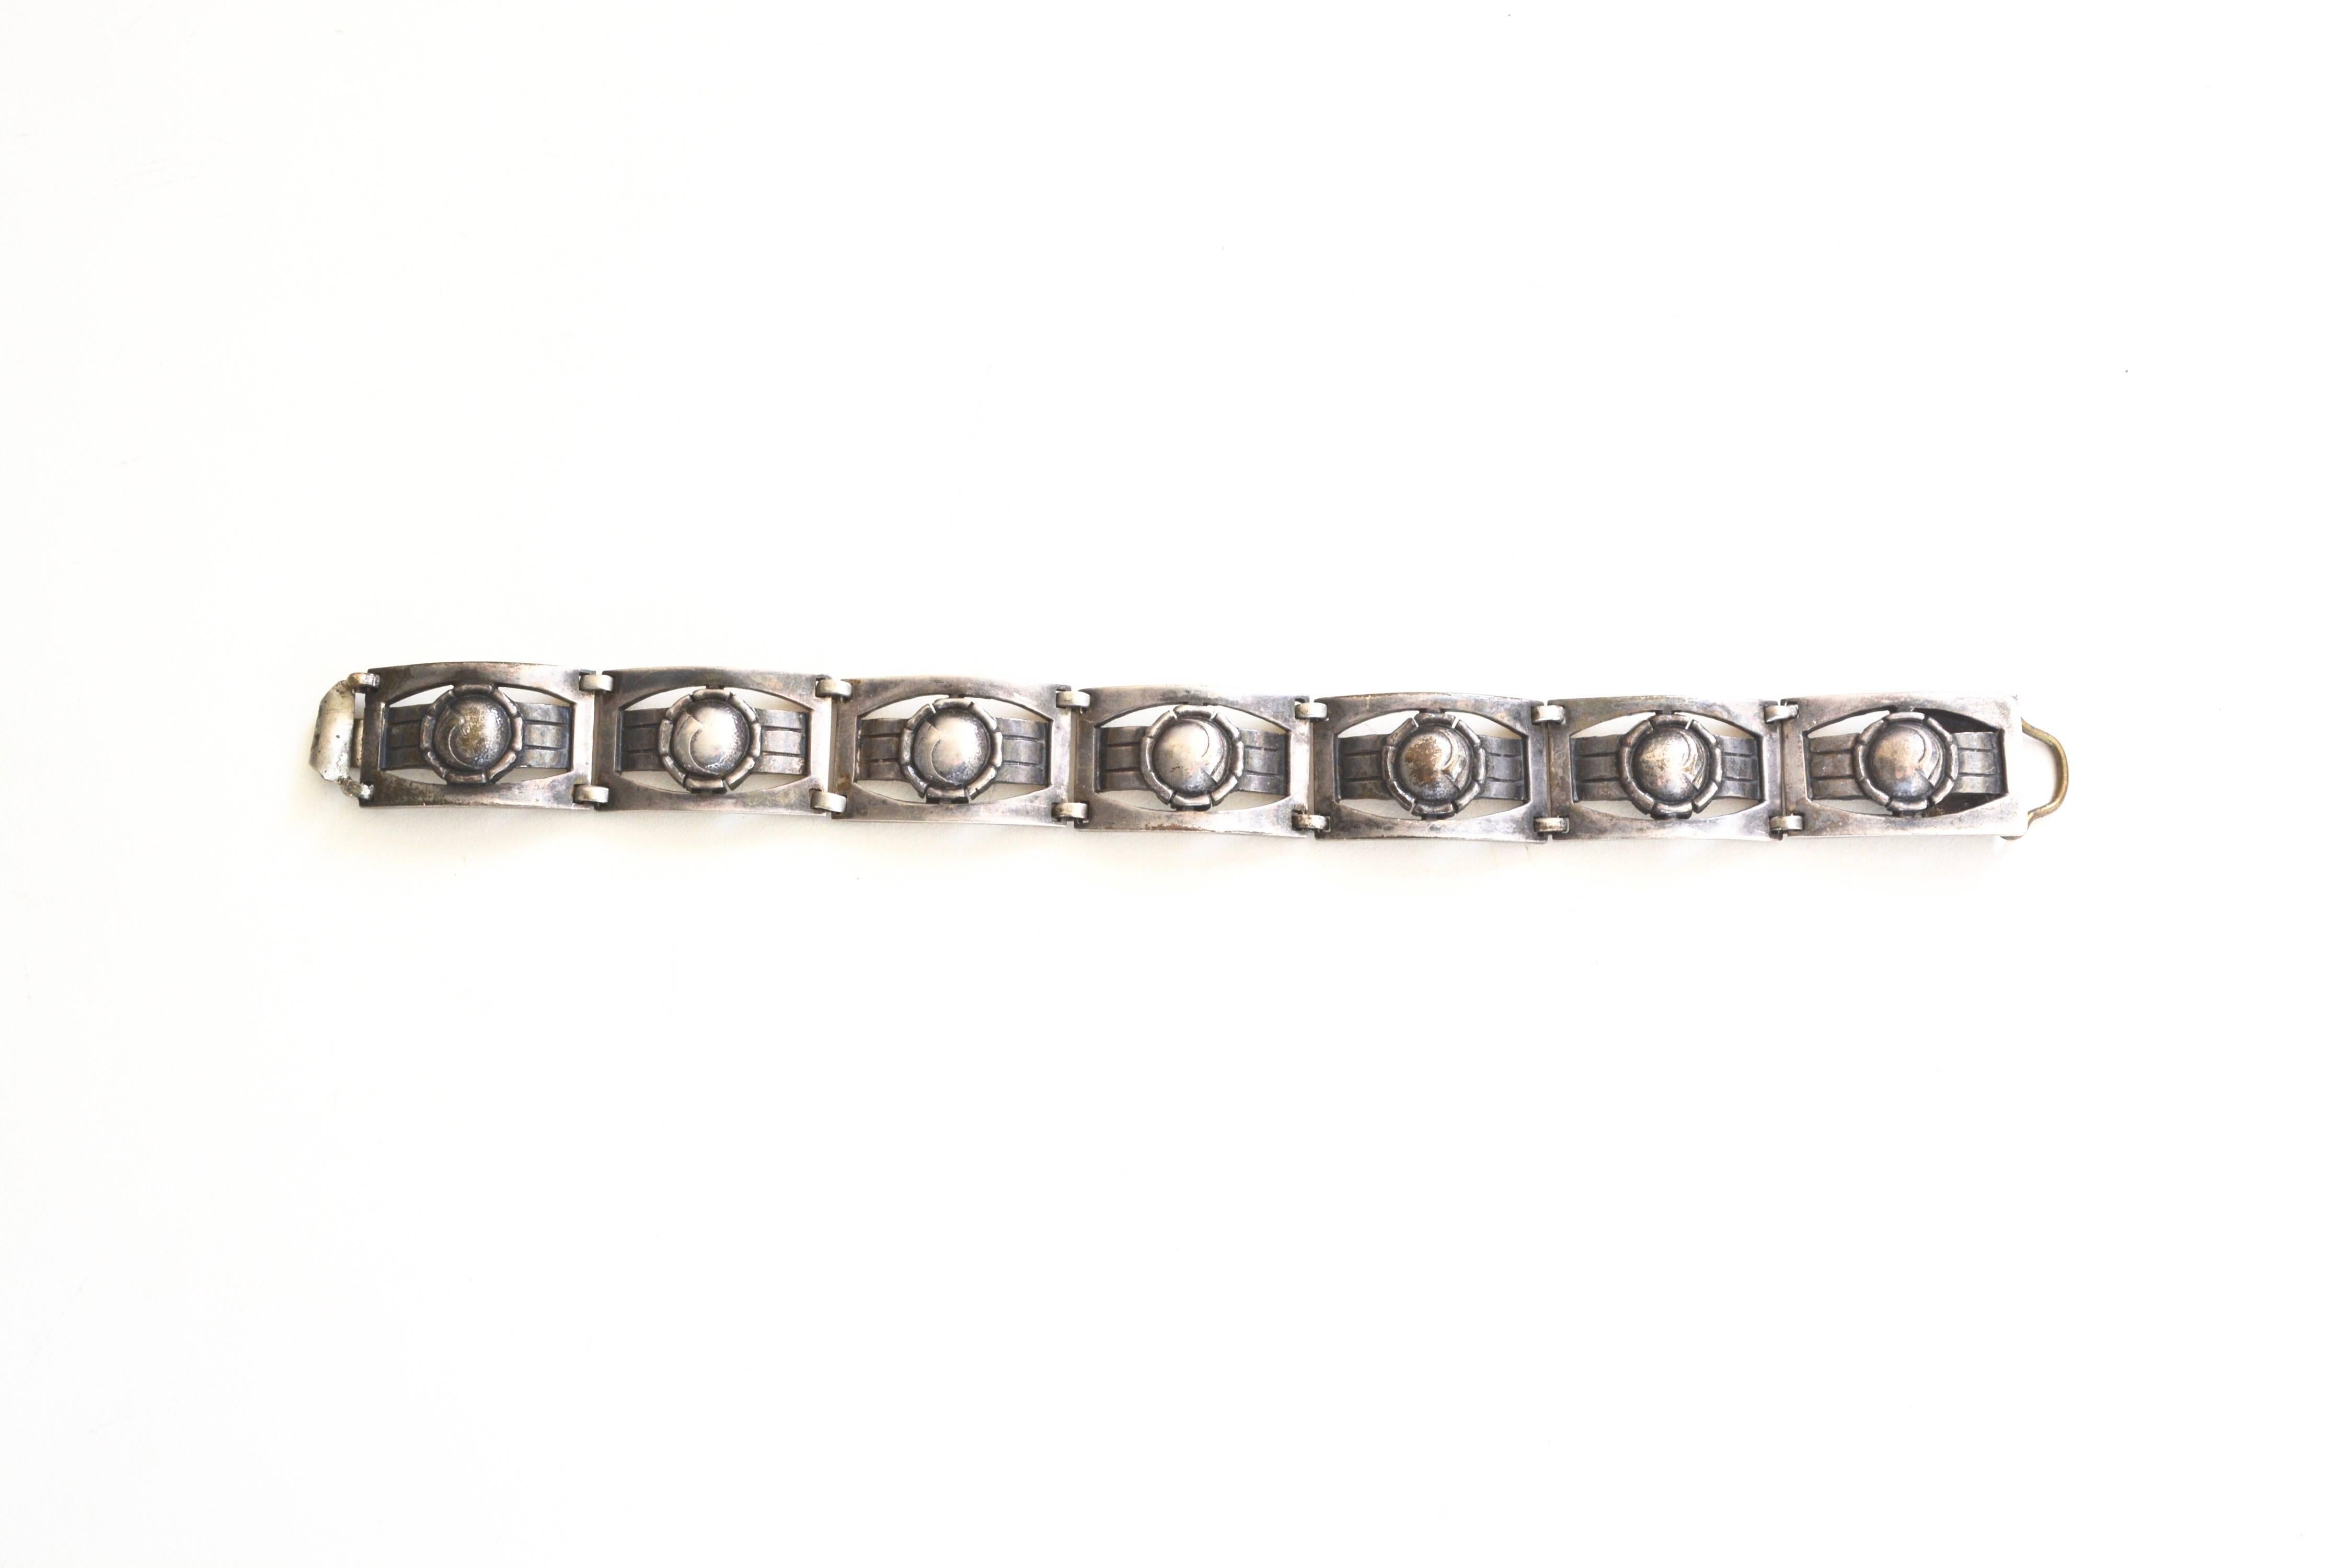 Marked Sterling, Art Deco era sterling bracelet.  The item has no other markings and is tarnished. Otherwise very good condition.  About 7